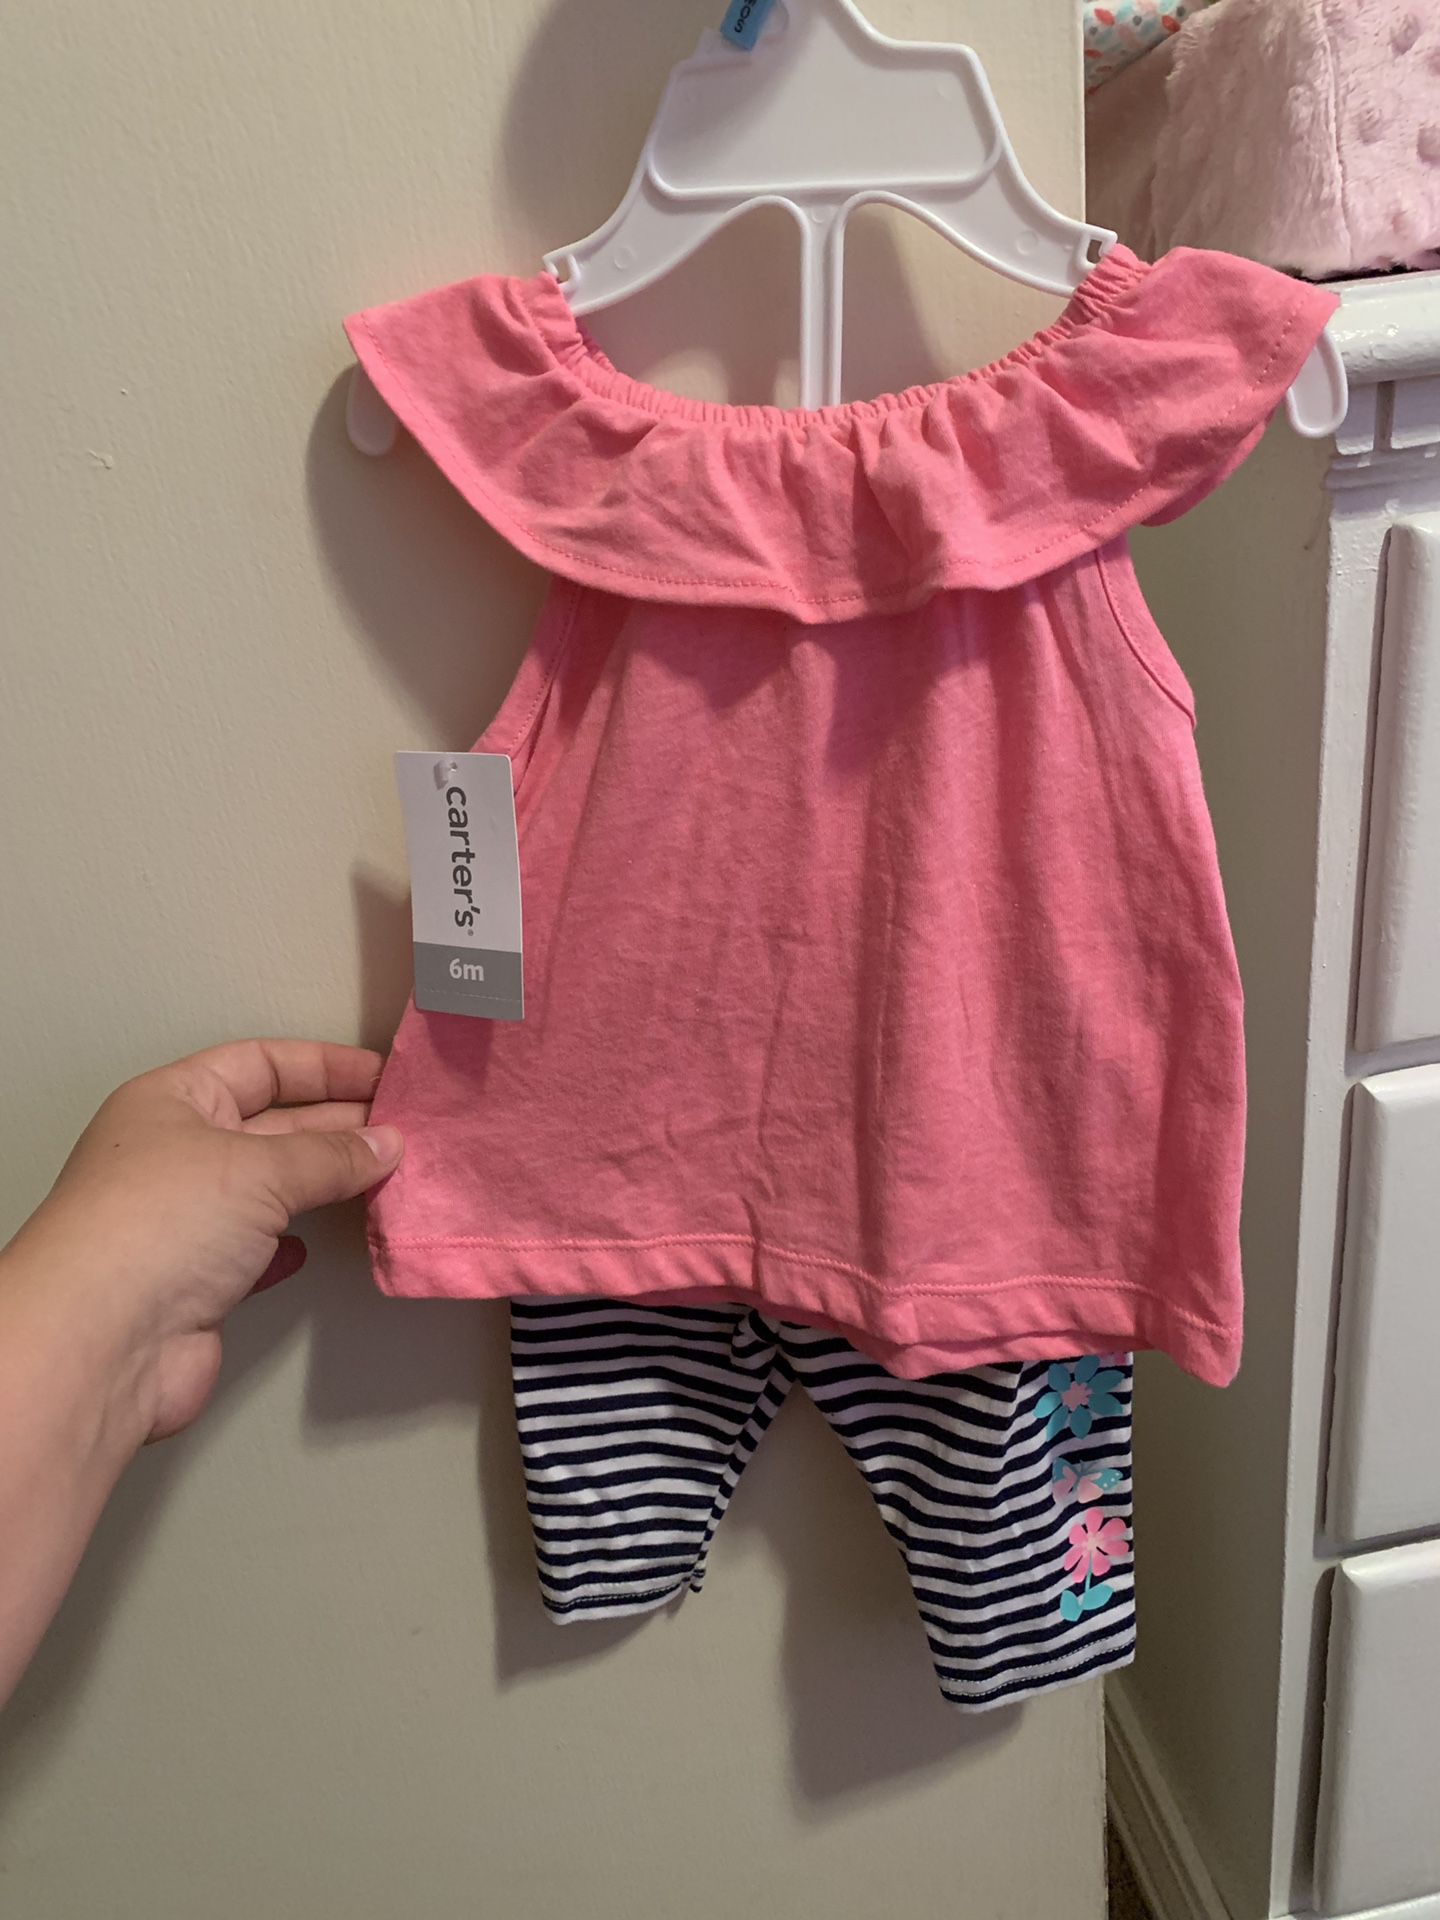 Baby Girl Outfit size 3 Month w/ tags